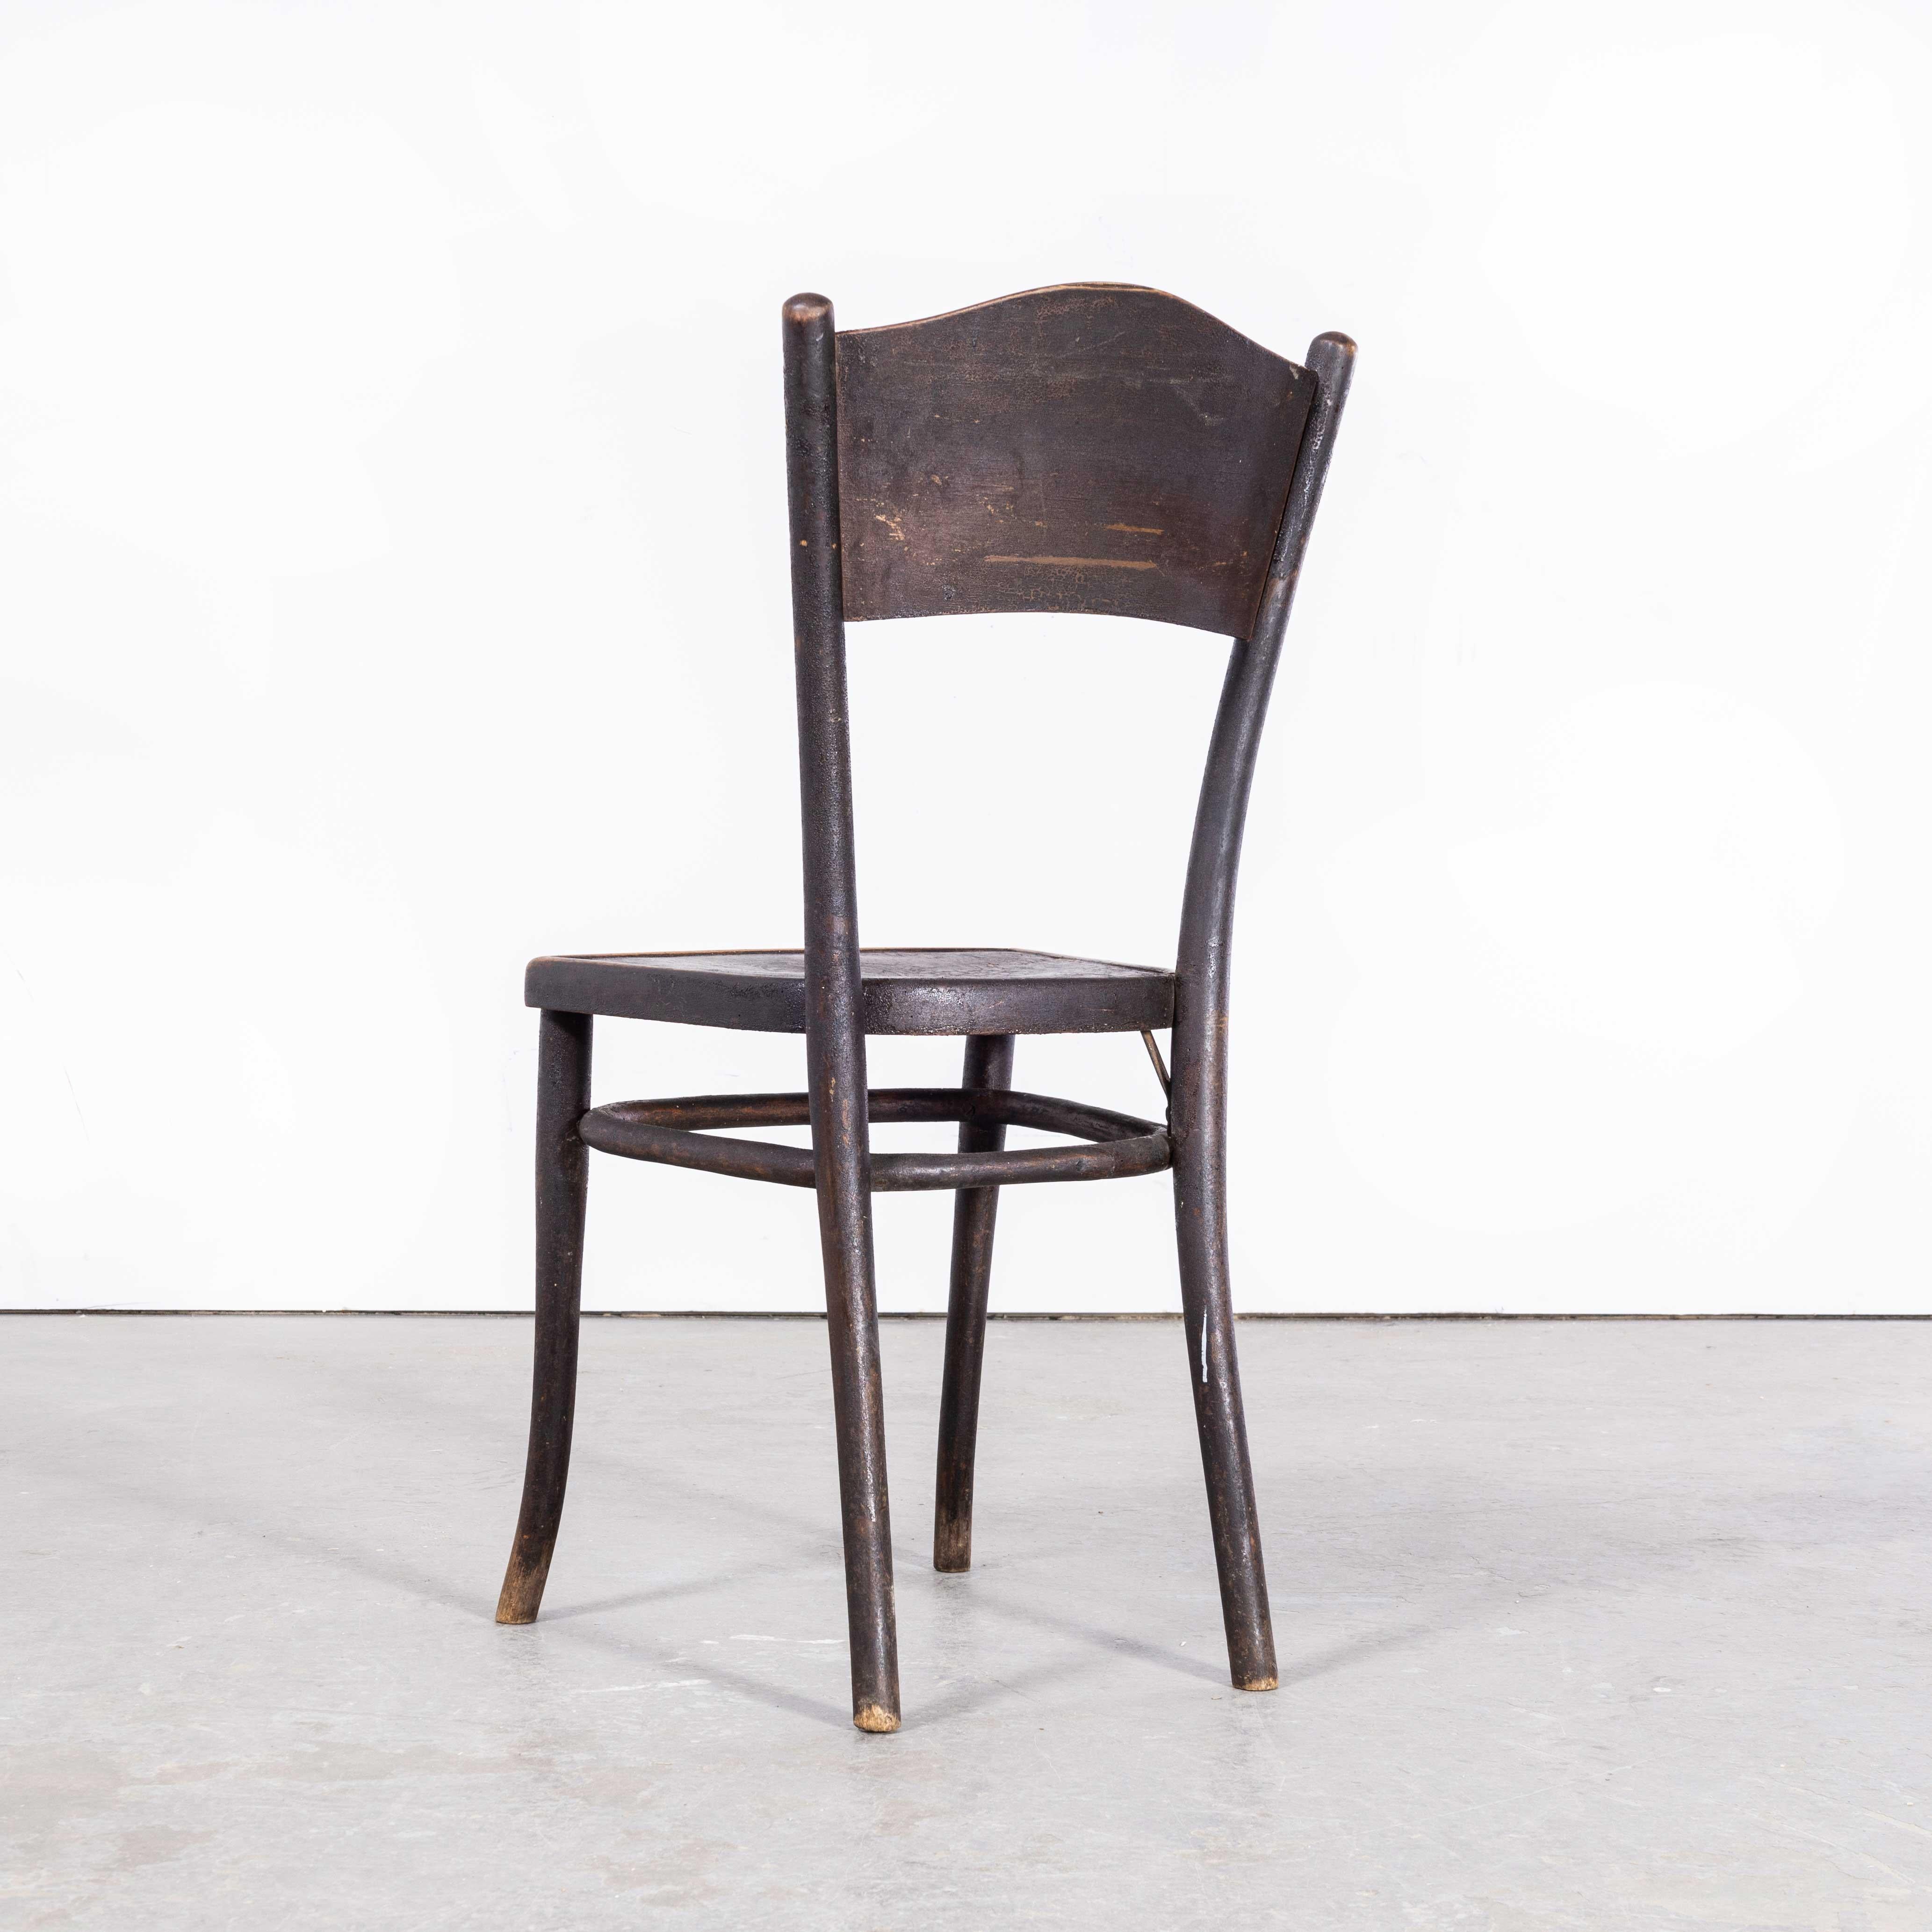 1890?s Bentwood Debrecen Single Dining Chair

1890?s Bentwood Debrecen Single Dining Chair. It is hard to be precise about the origin of this chair as little history is known, but what we do know is at the beginning of the 20th century two